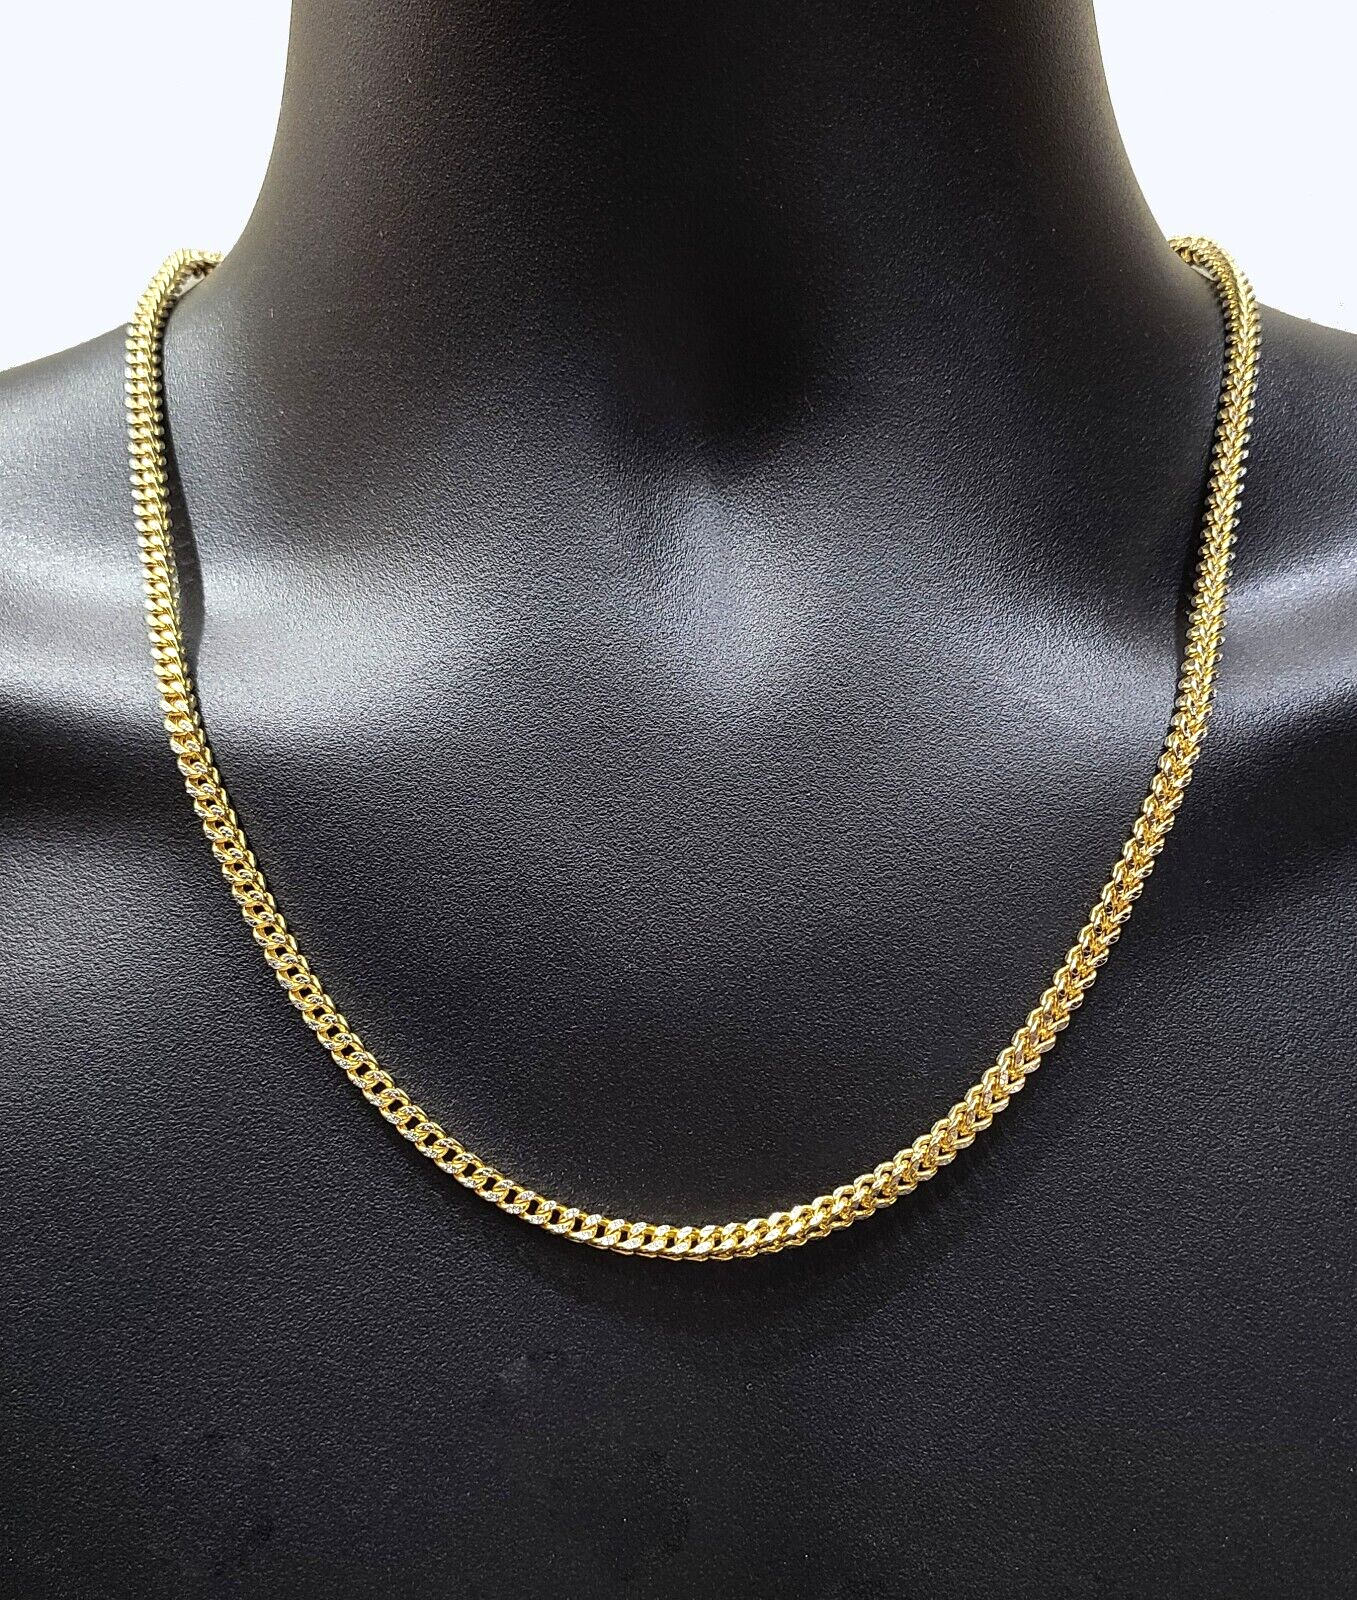 Solid 22 inches long 22k yellow gold handmade fabulous byzantine stylish chain  necklace unisex gifting jewel | TRIBAL ORNAMENTS